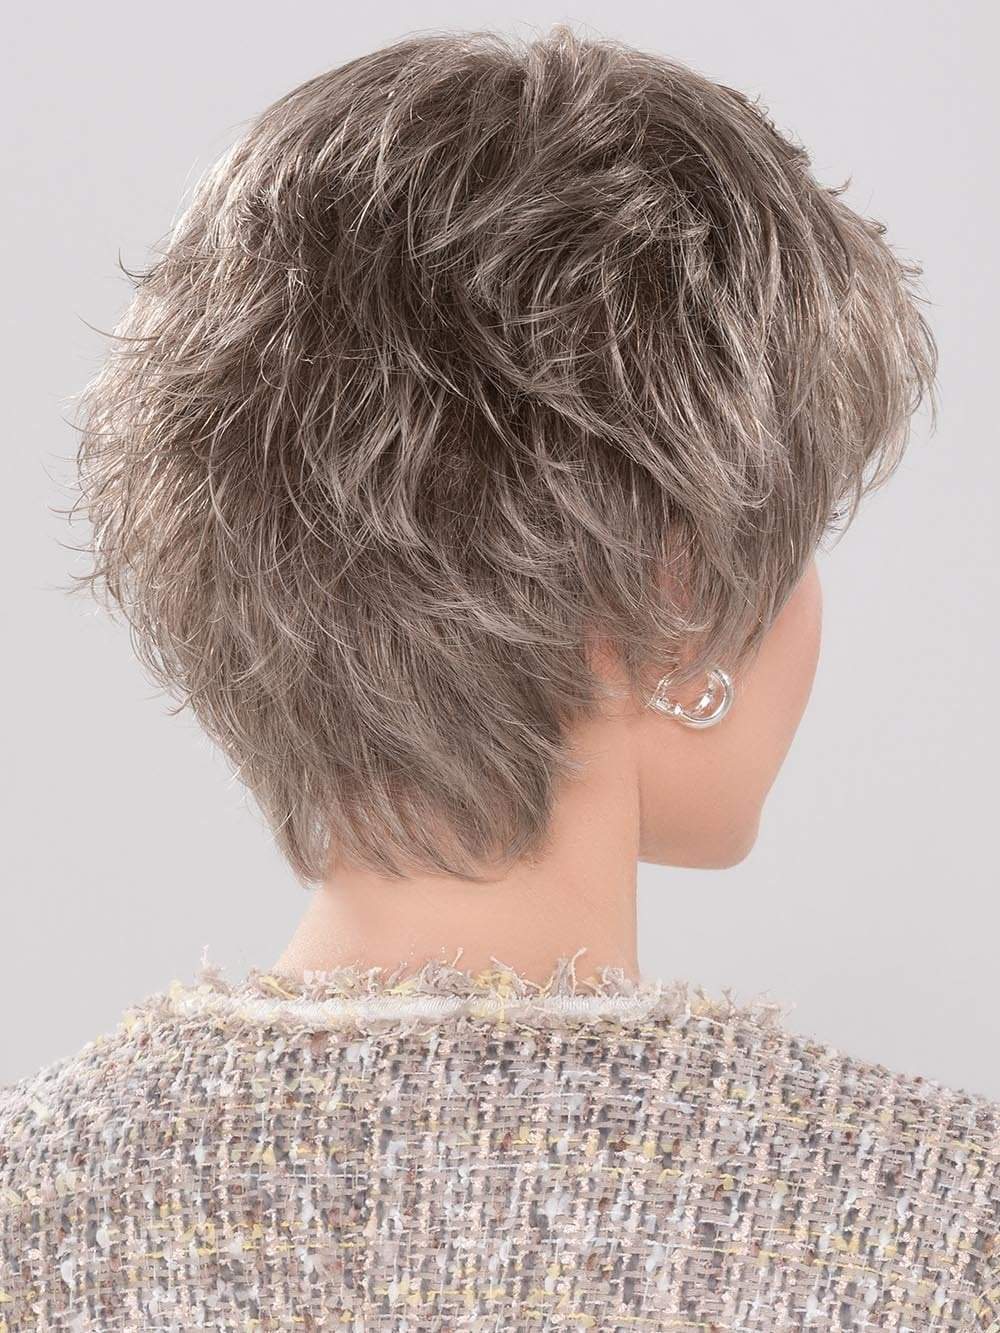 This short style has lots of layers that delicately graduate down the nape area, giving you a perfect balance of coverage and style